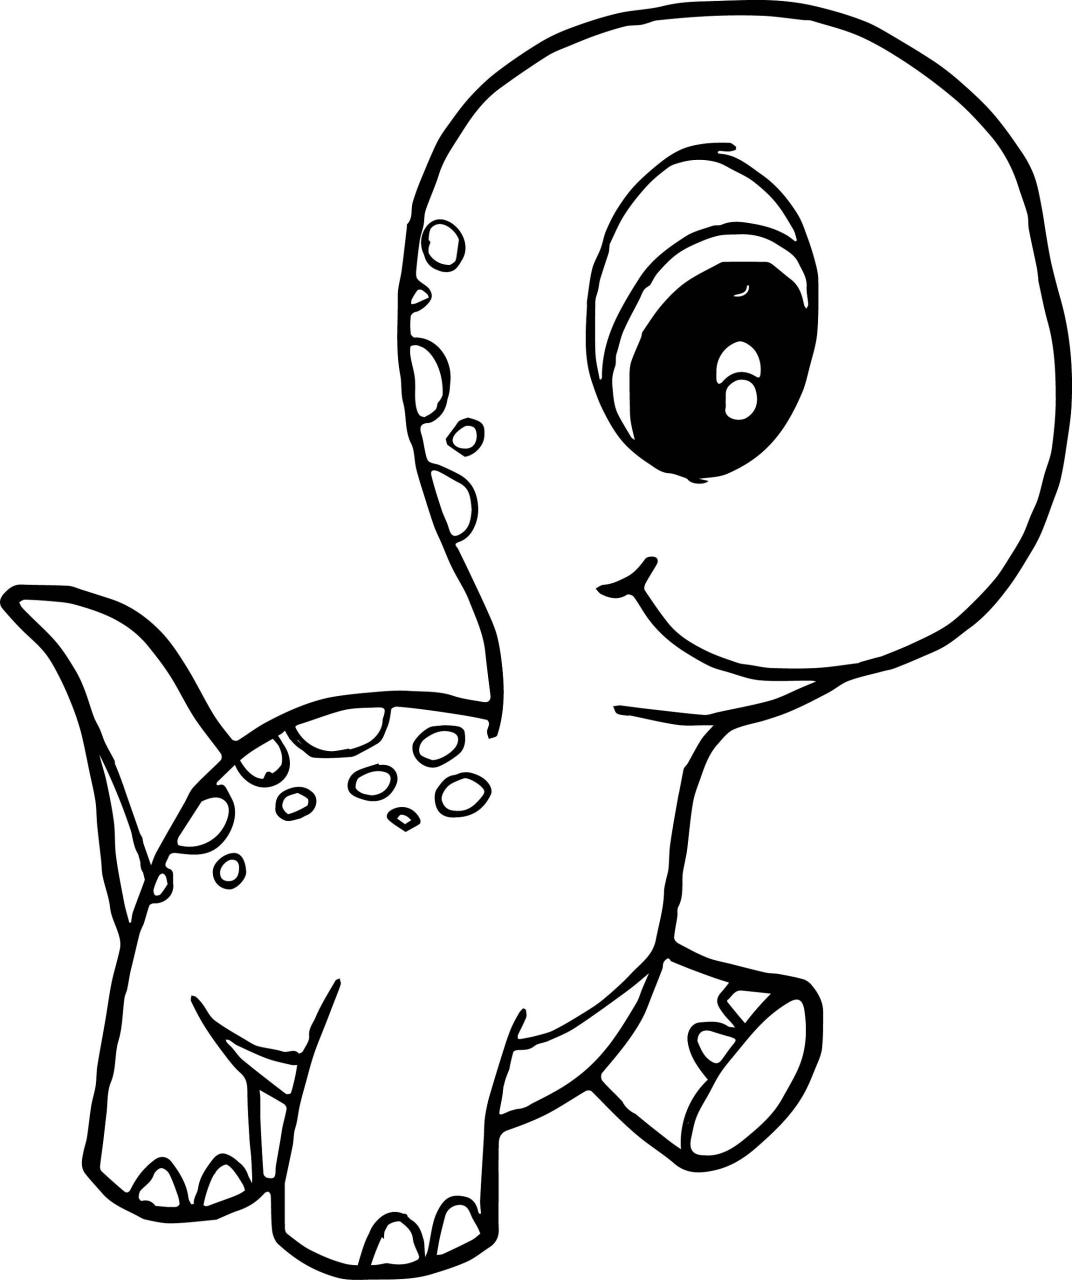 Coloring Pages For Kids Dinosaurs